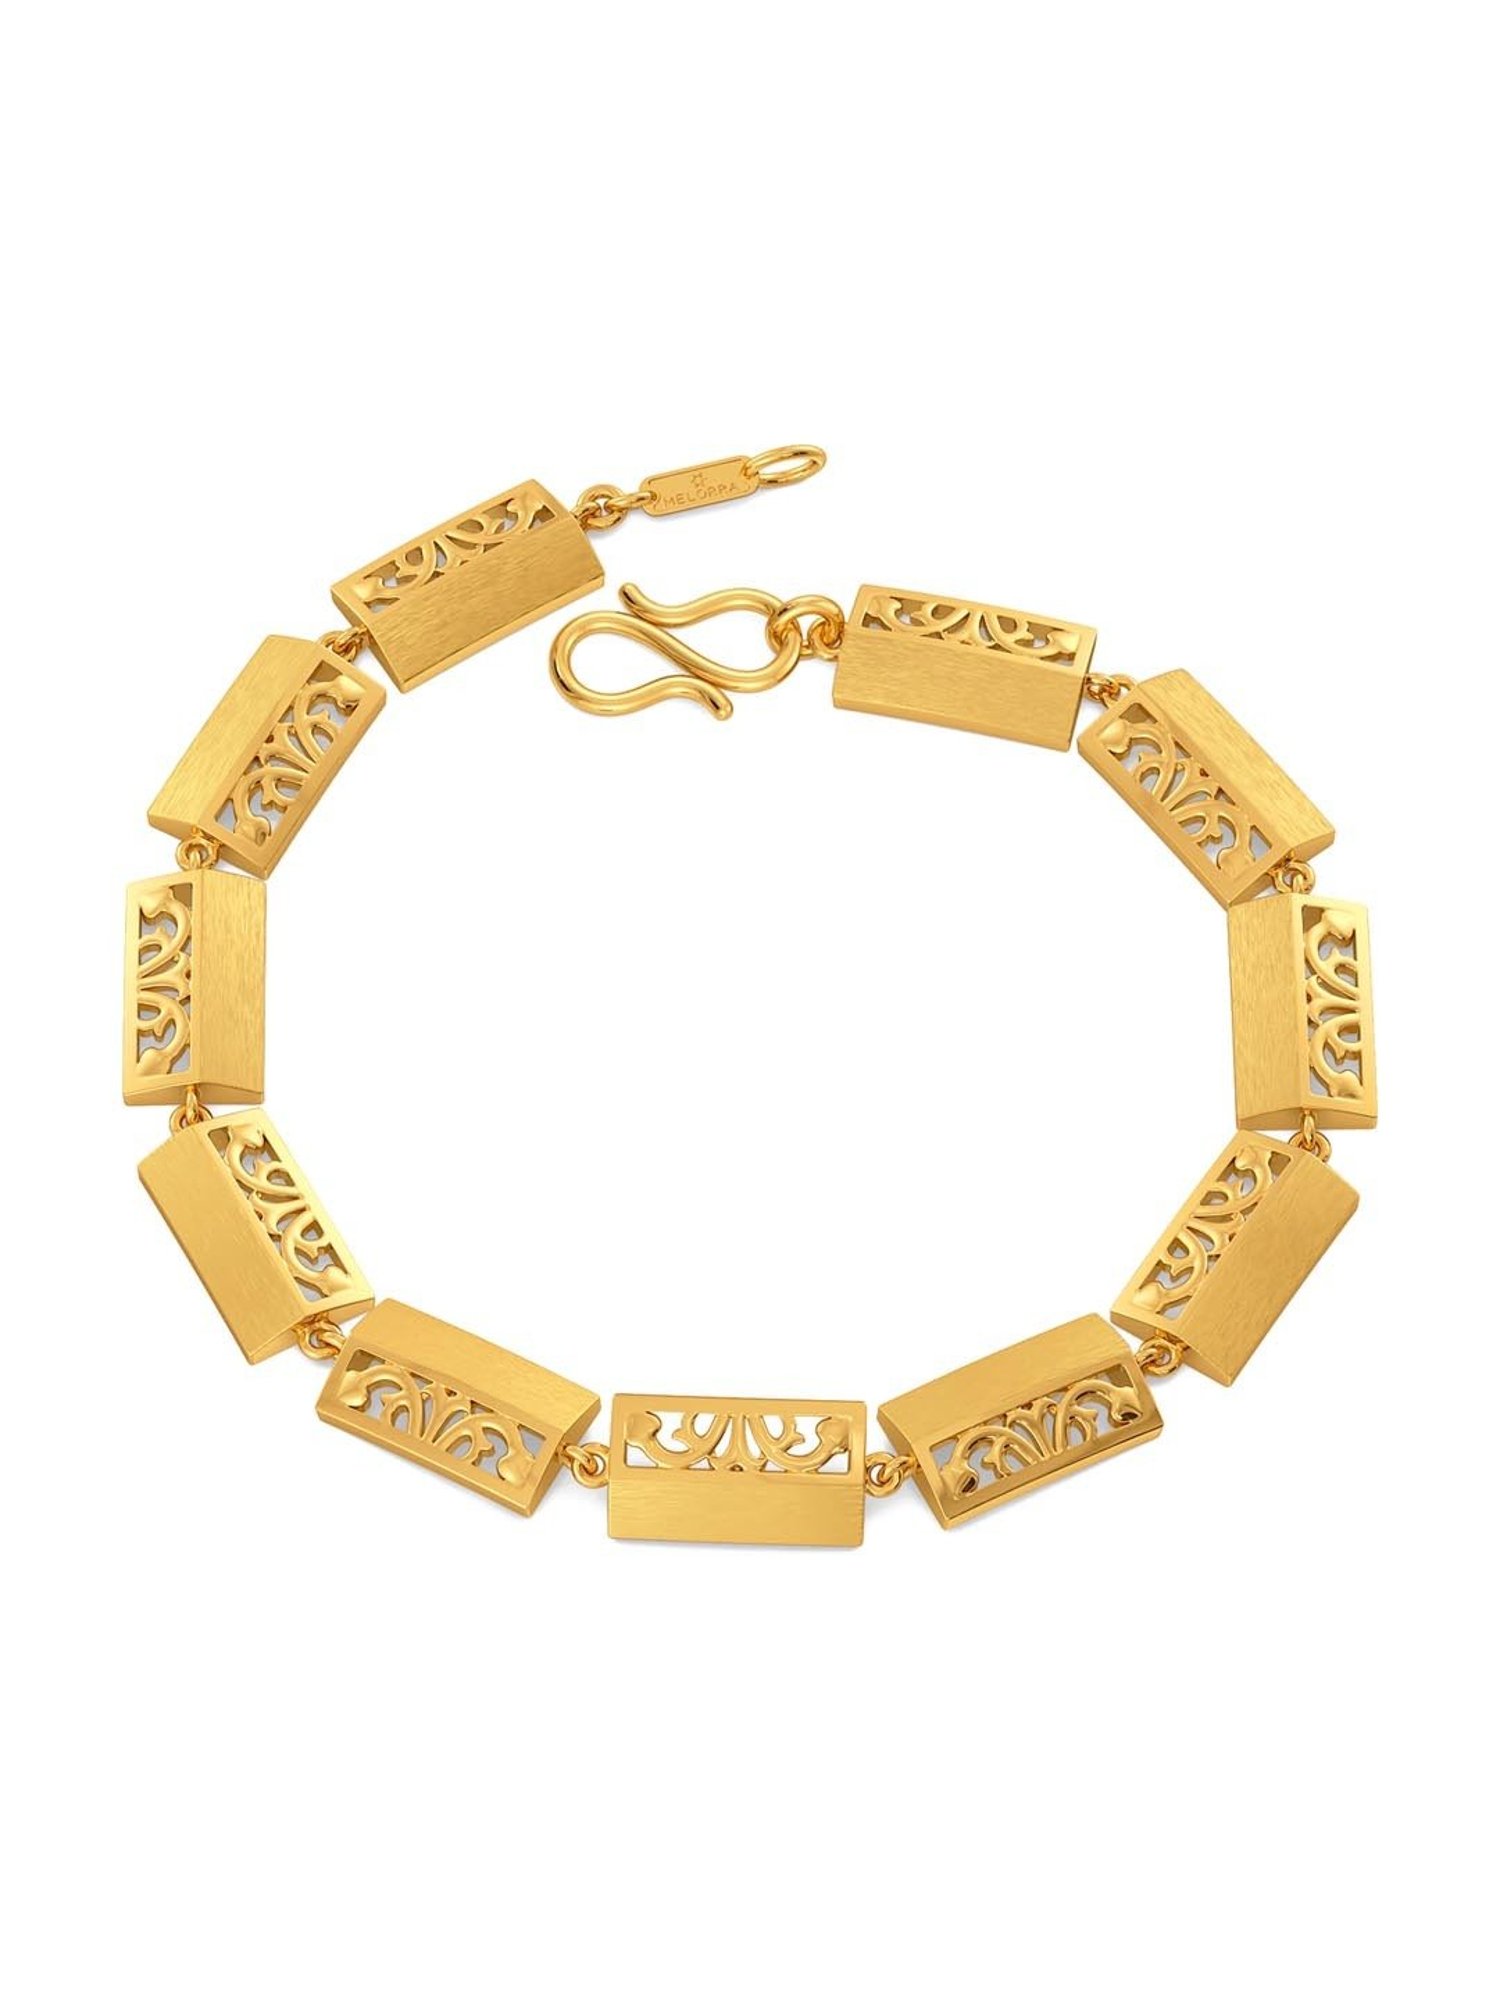 Buy MELORRA 18 KT The Juliet Groove Gold Bracelet Yellow Gold at Amazon.in